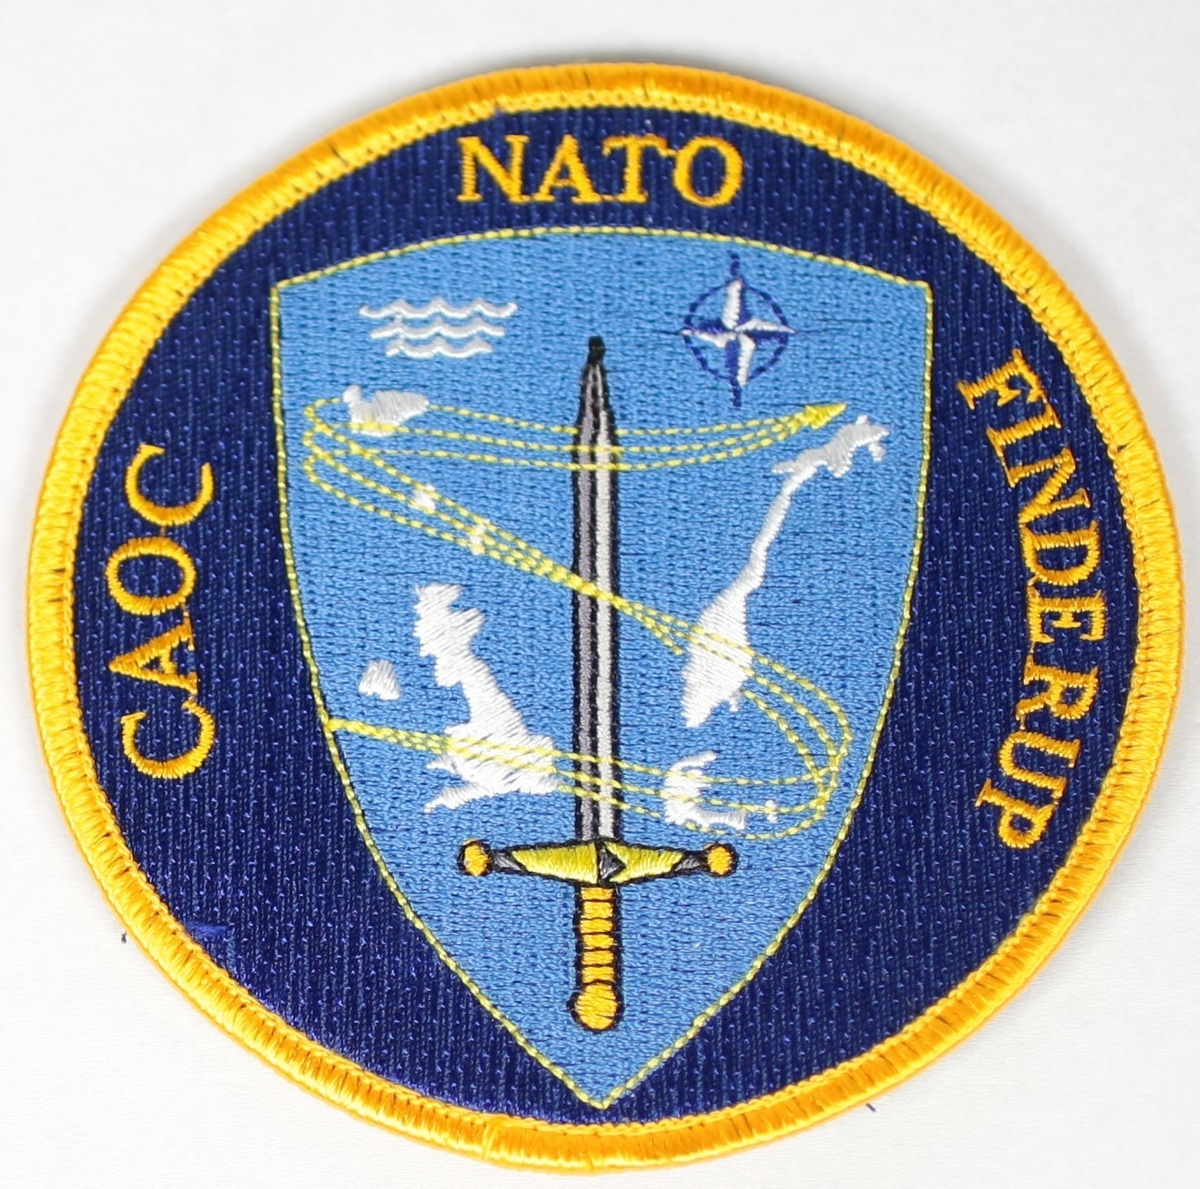 The insignia for Combined Air Operation Centre Finderup has, at its centre, the sword of Component Command Air Ramstein. Component Command Air
Ramstein is the Headquarters responsible for all NATO air activities within the Northern Region. To the left and right of this protective sword are the nations: Iceland, United Kingdom, Denmark and Norway, within whose airspace all NATO air activities is the responsibility of CAOC Finderup – most important the air policing by NATO Quick Reaction Alert assets as indicated by the aircraft symbol. Three aircraft tracks merge into one to symbolize the amalgamation of former CAOC Finderup, CAOC Reitan (Norway) and CAOC High Wycombe (UK) into CAOC Finderup.